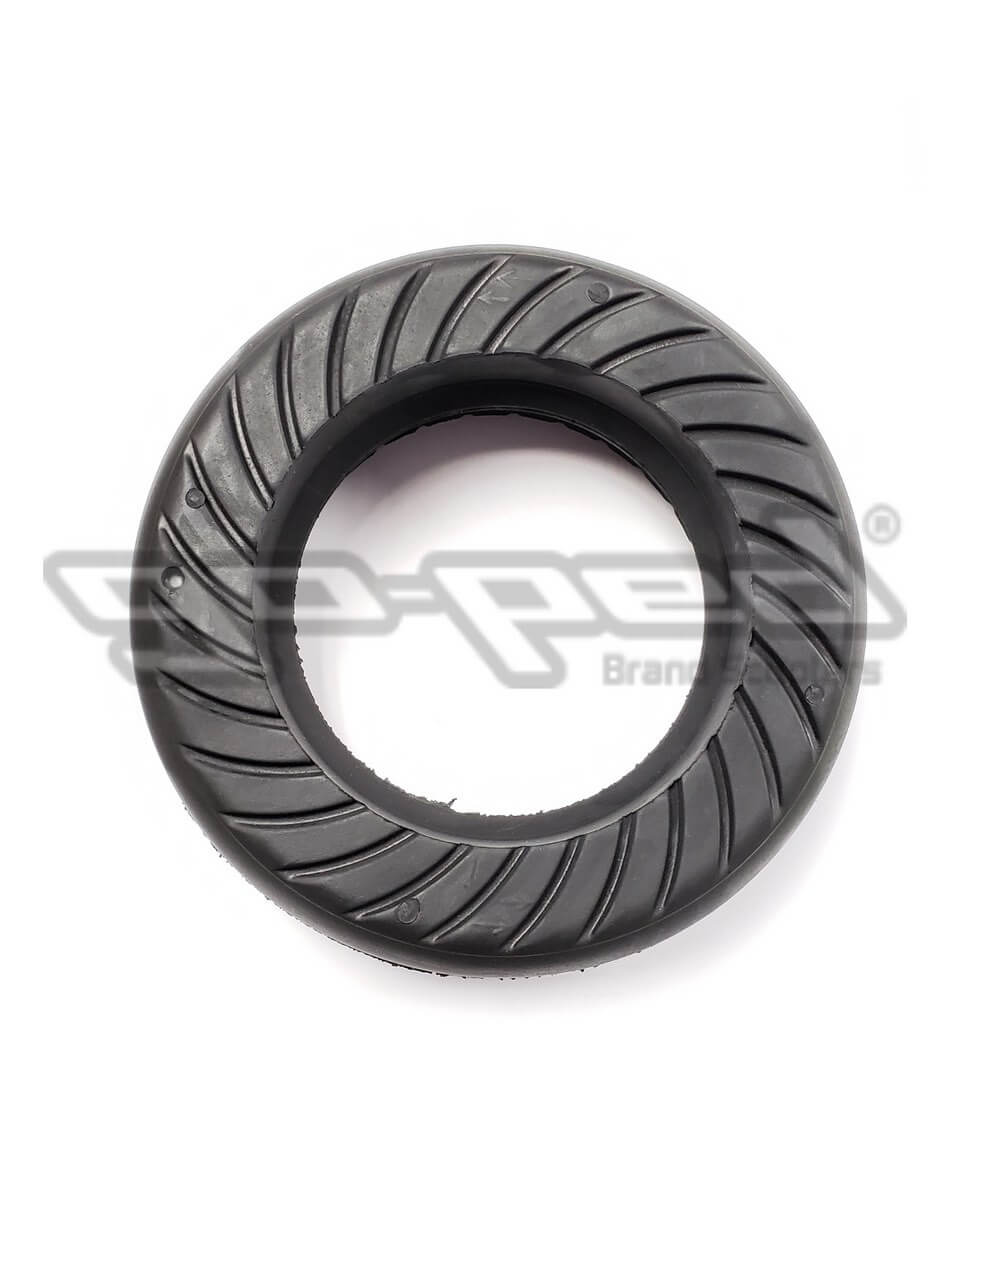 Go-Ped GO ACTIVE WIRE "Rubber Only" (1058O) for Scooters